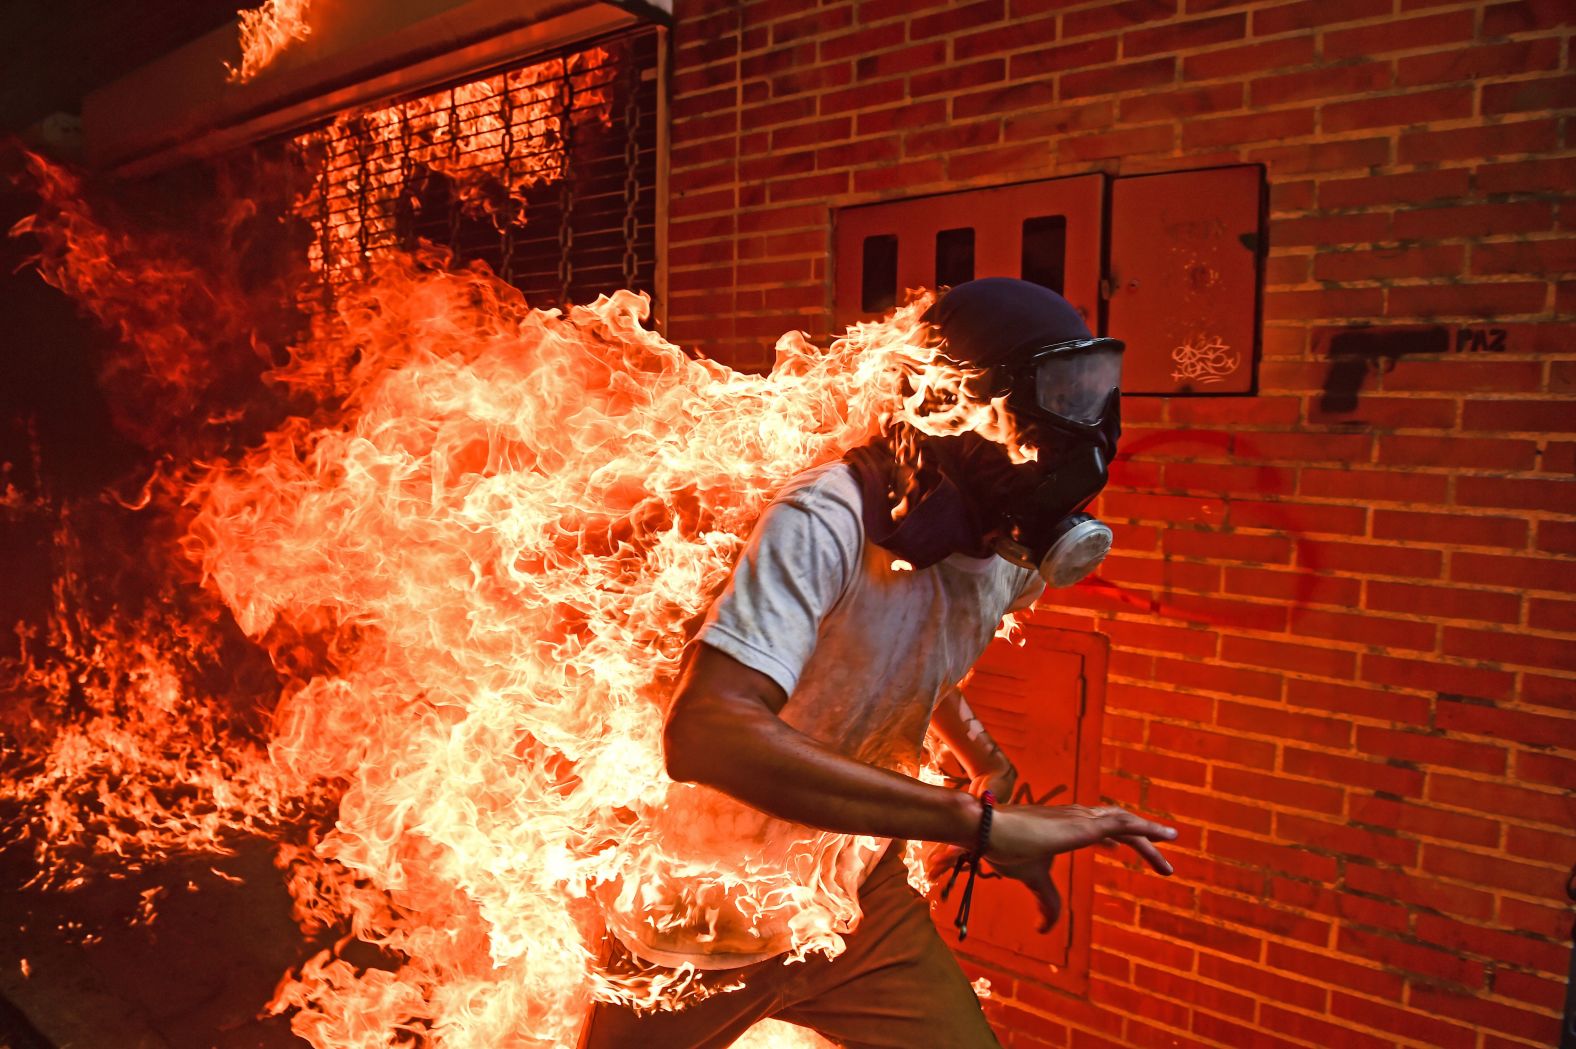 A demonstrator catches on fire during anti-government protests in Caracas, Venezuela, in May 2017. It happened as protesters clashed with police and the gas tank of a police motorbike exploded. Other photos from the scene showed the man being attended to with burns on his body.